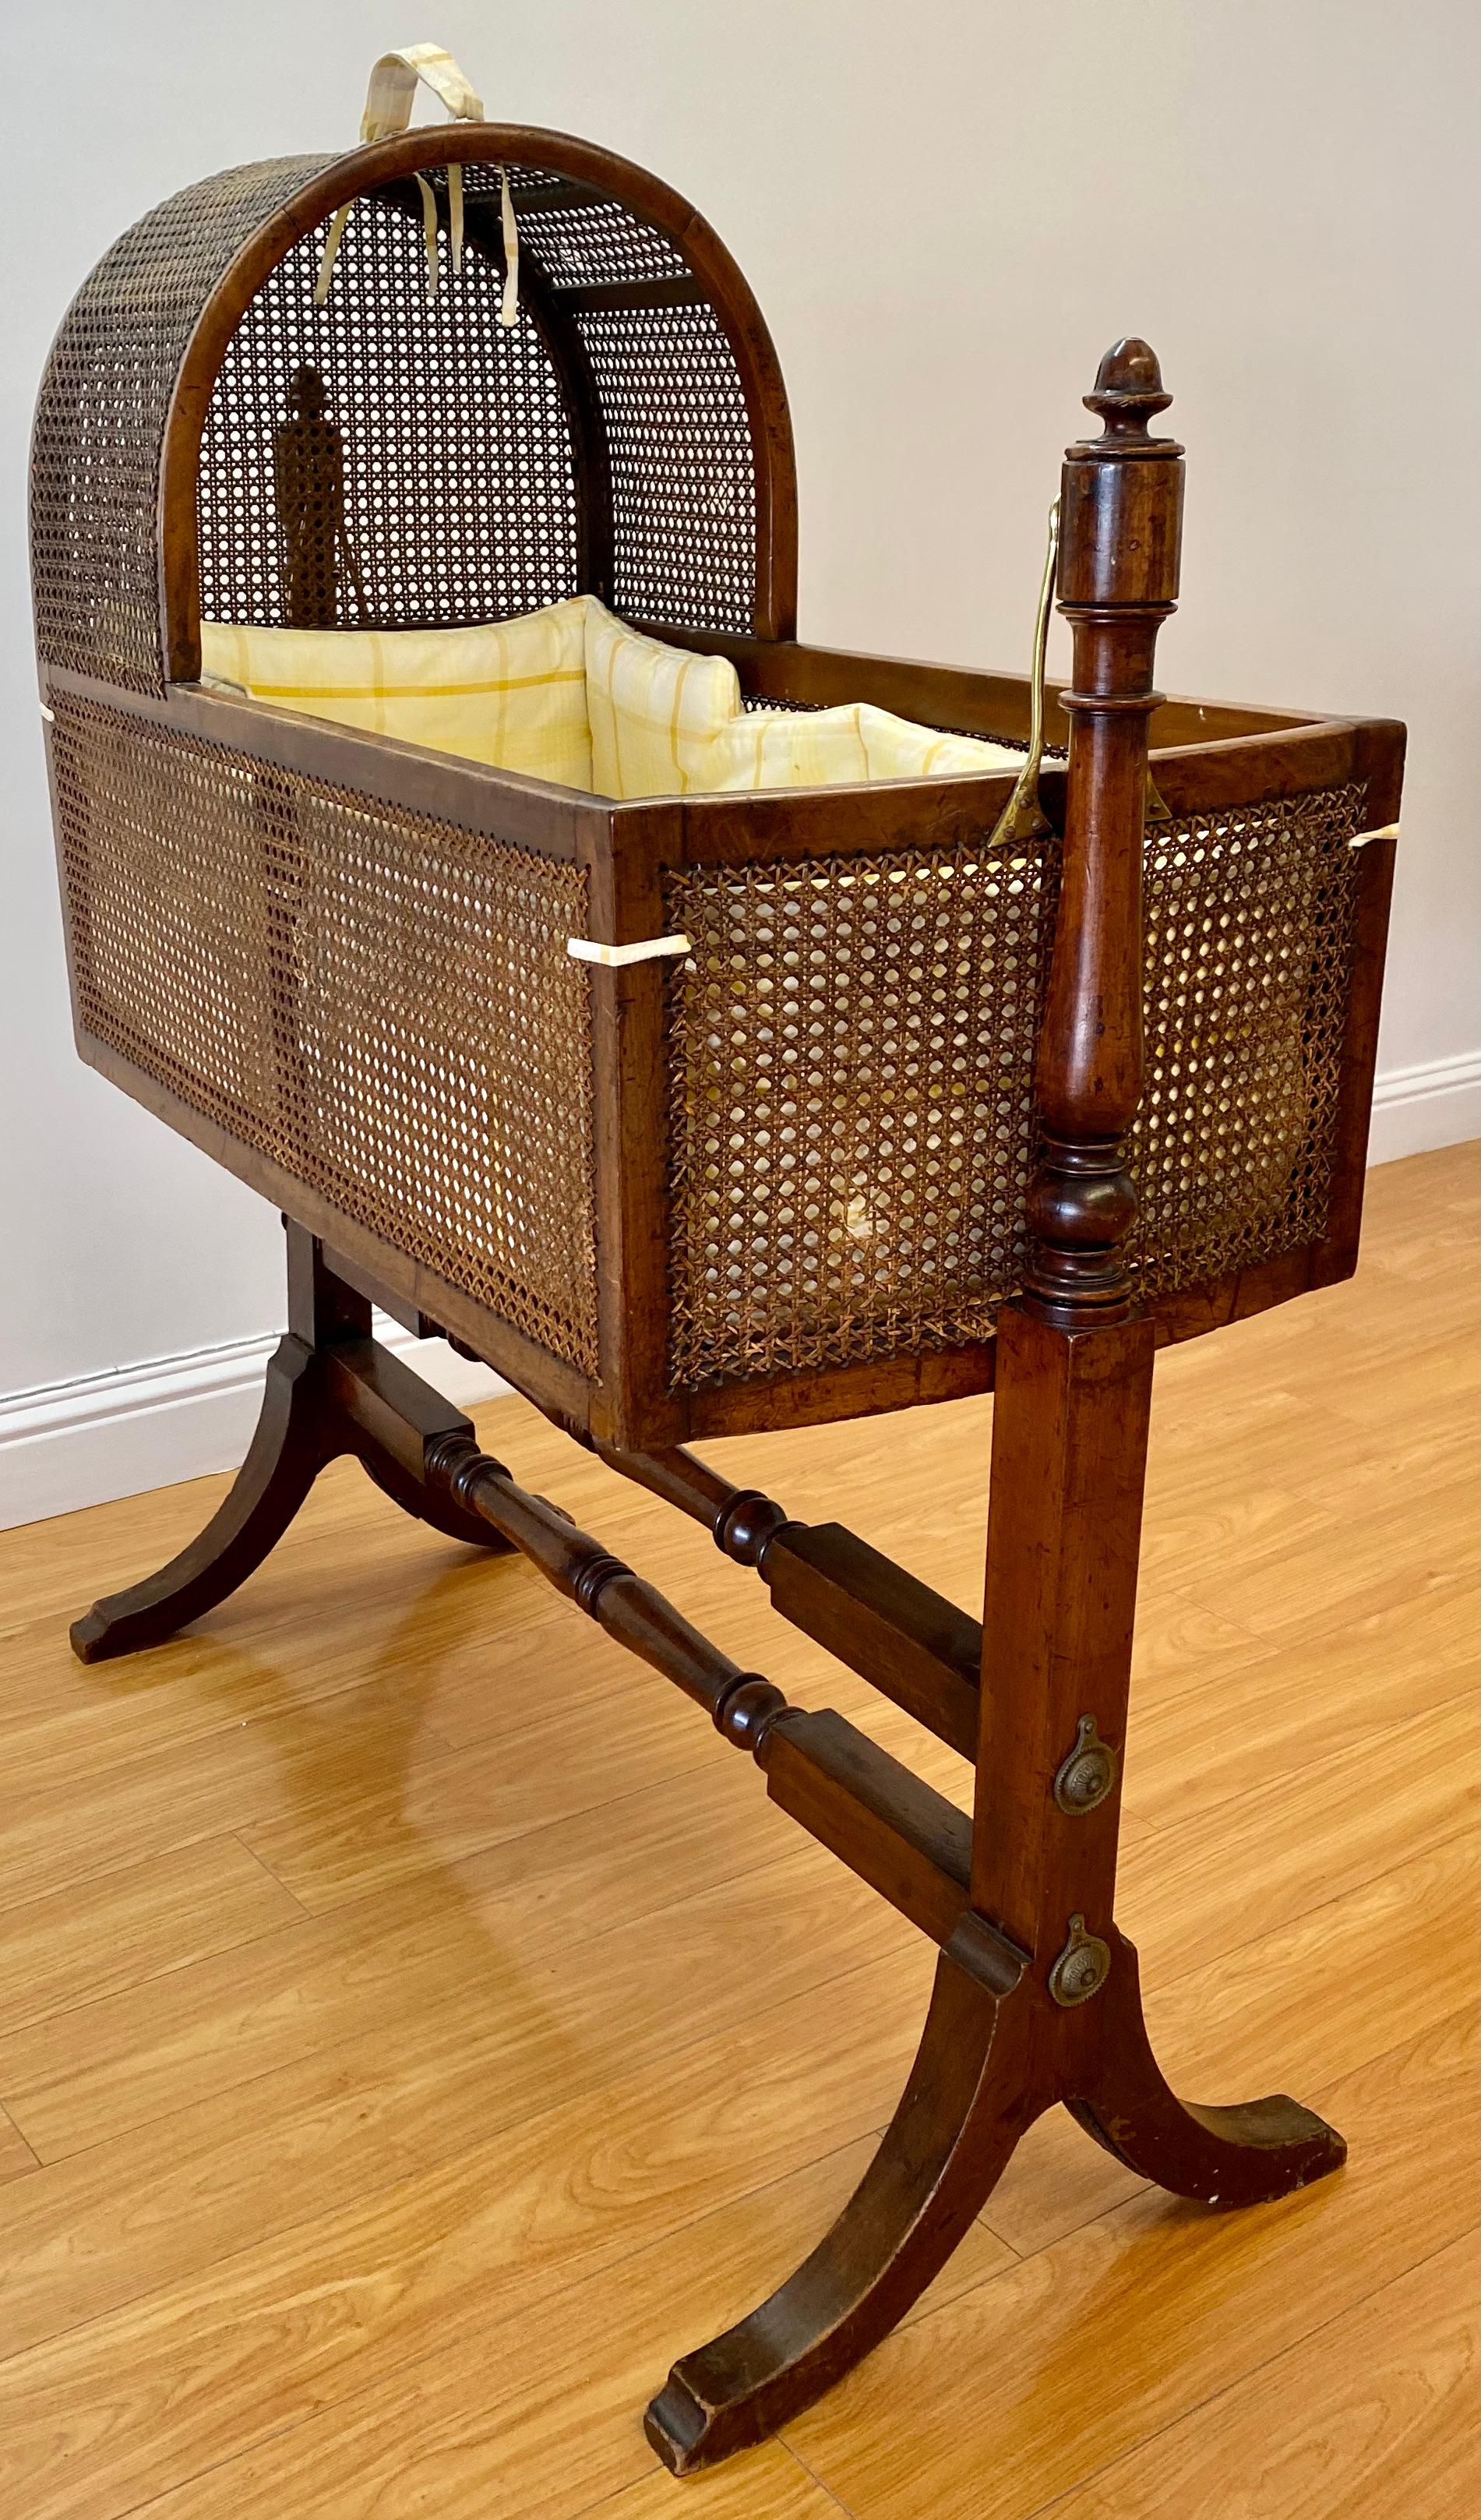 Georgian mahogany child's rocking cradle with caned sides, circa 1820

Handcrafted from solid mahogany with bergere style cane covering the canopy and sides

The slat bottom provides solid support for the cushioned bedding

A label on the